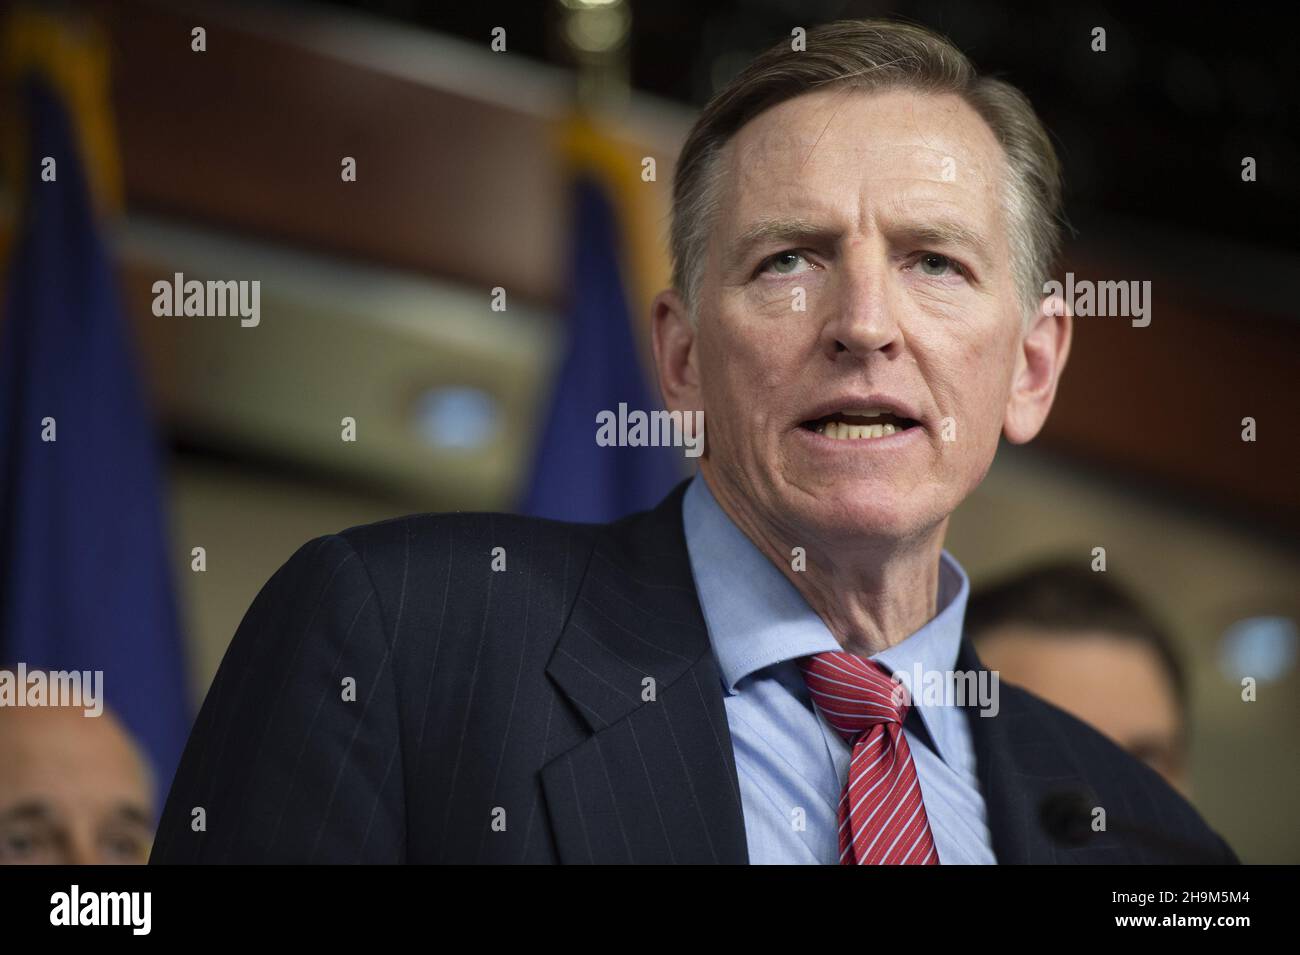 Washington, United States. 07th Dec, 2021. Rep. Paul Gosar, R-AZ, speaks during a news conference at the US Capitol in Washington, DC on Tuesday, December 7, 2021. The group of Republican House members are calling for the January 6th defendants to be released from DC jail. Photo by Bonnie Cash/UPI Credit: UPI/Alamy Live News Stock Photo